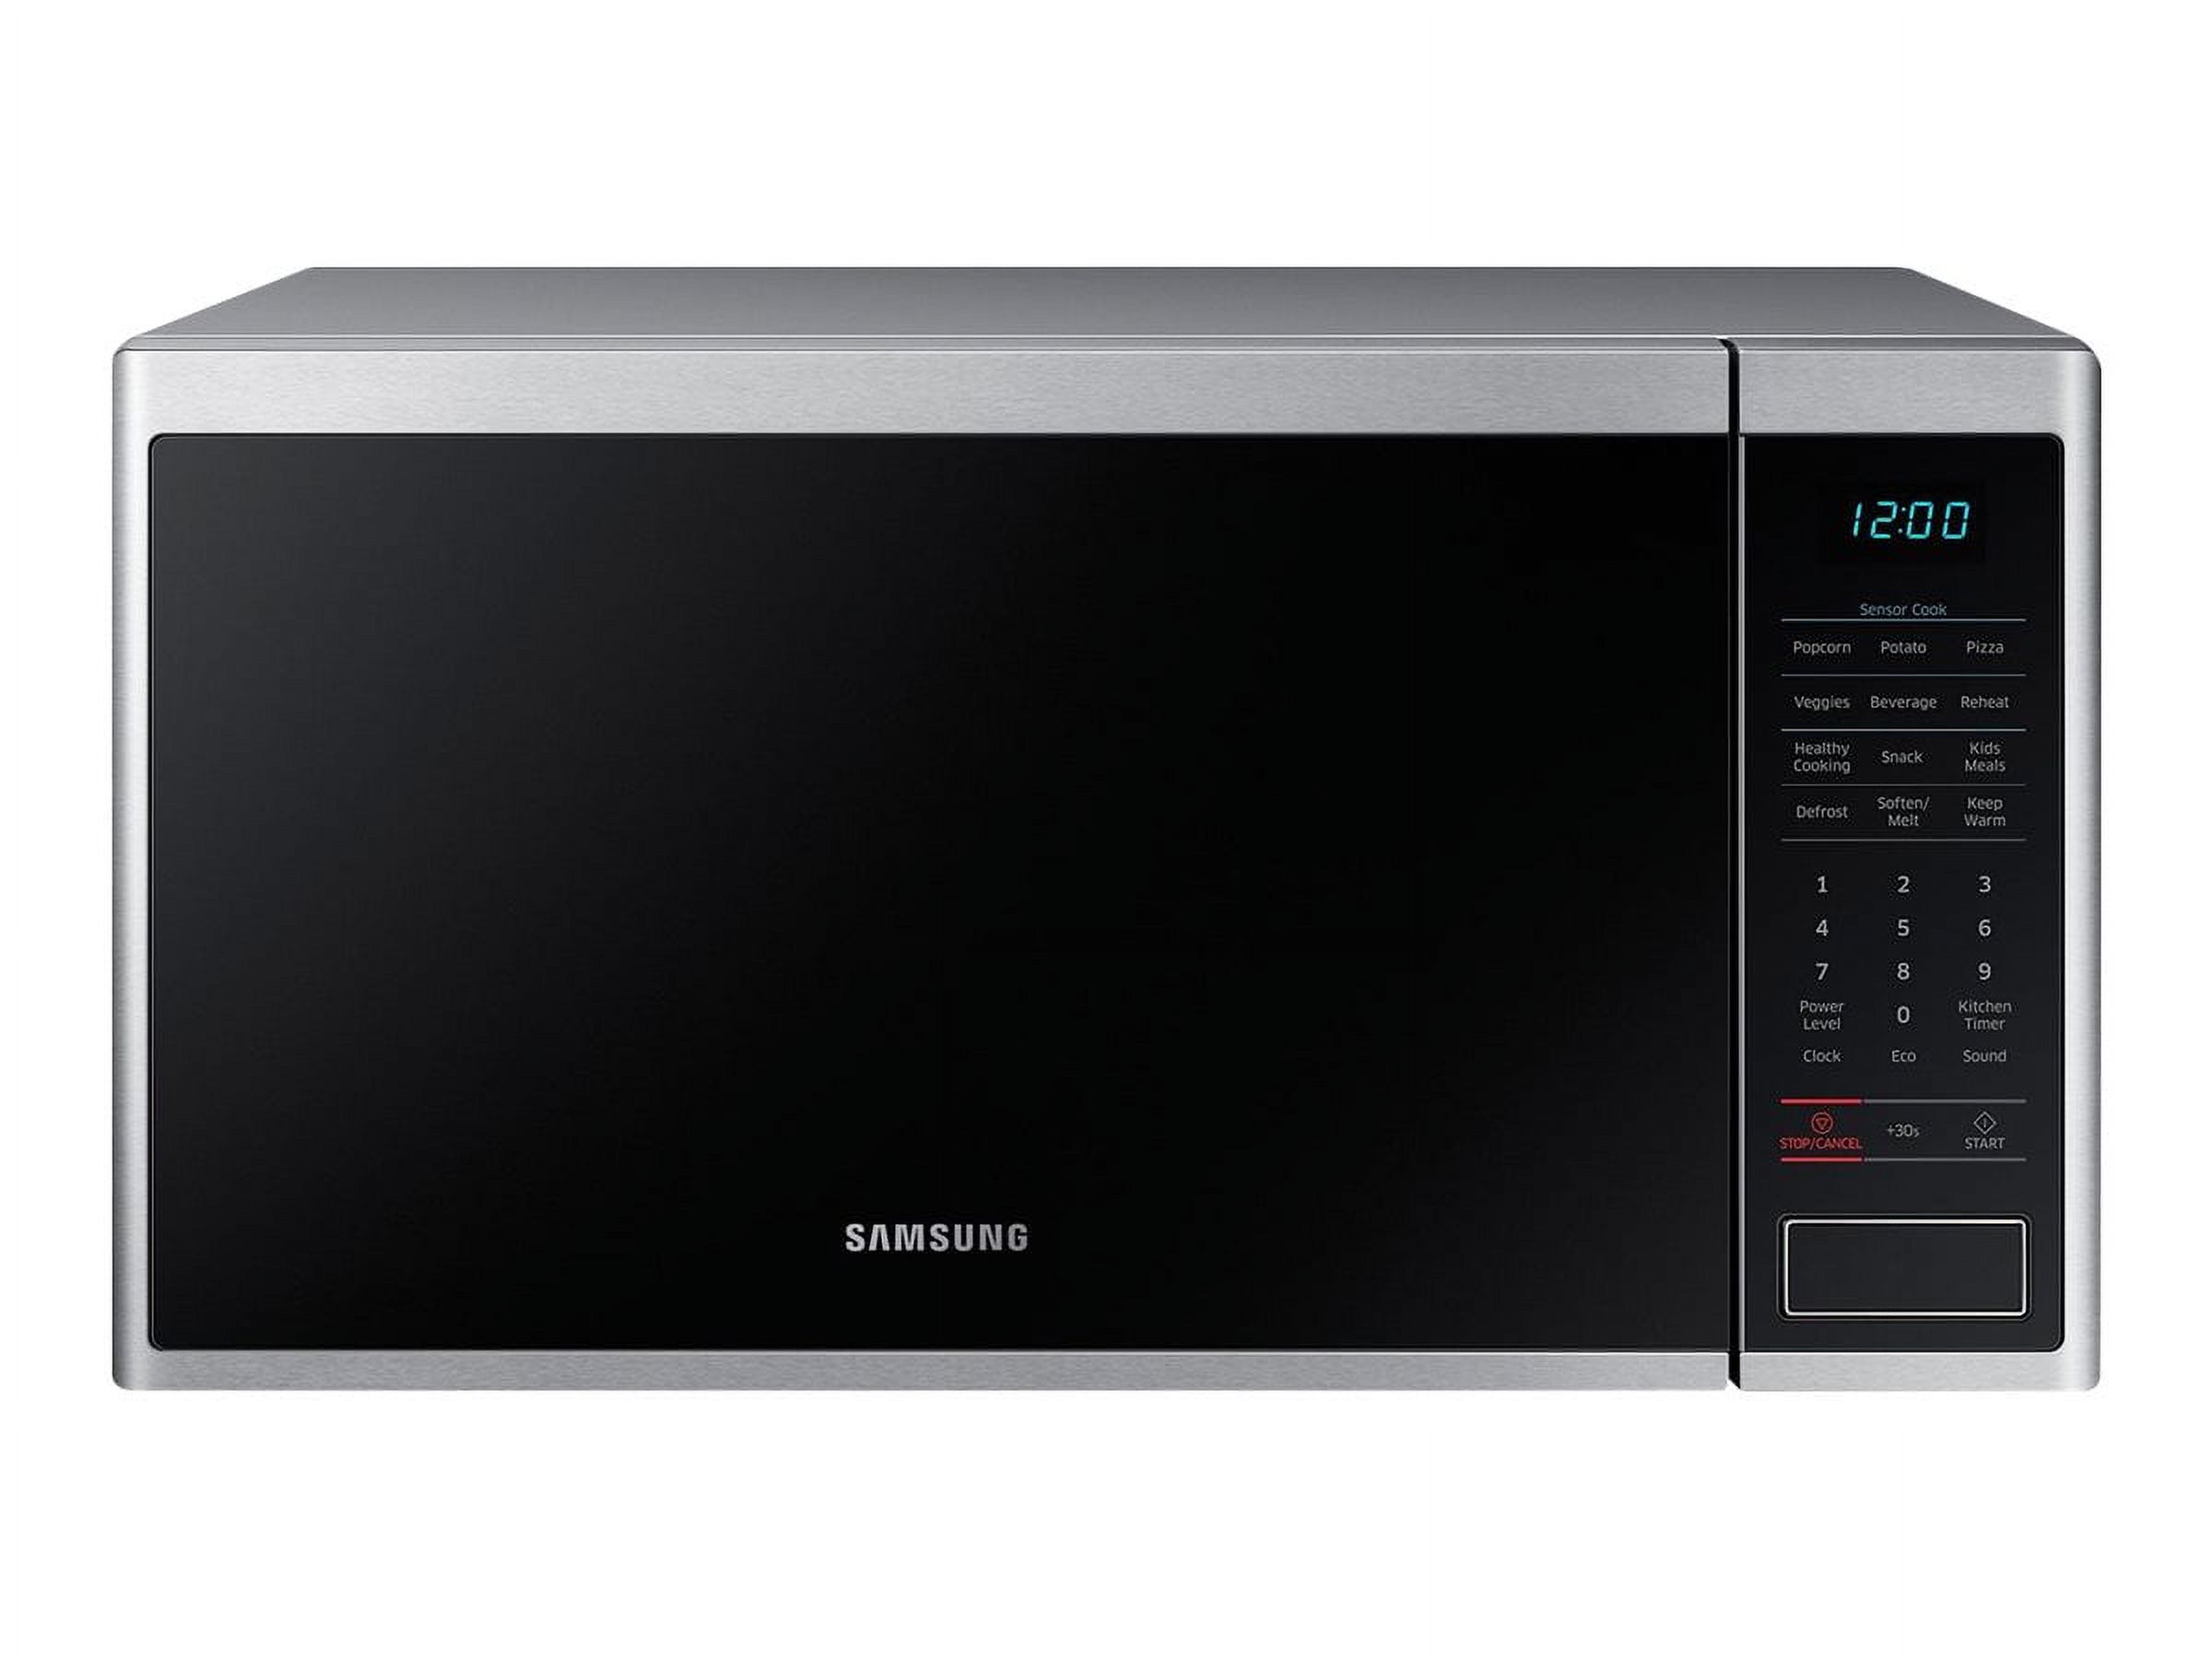 Samsung 1.4 cu. ft. Countertop Microwave- Stainless Steel - image 1 of 4